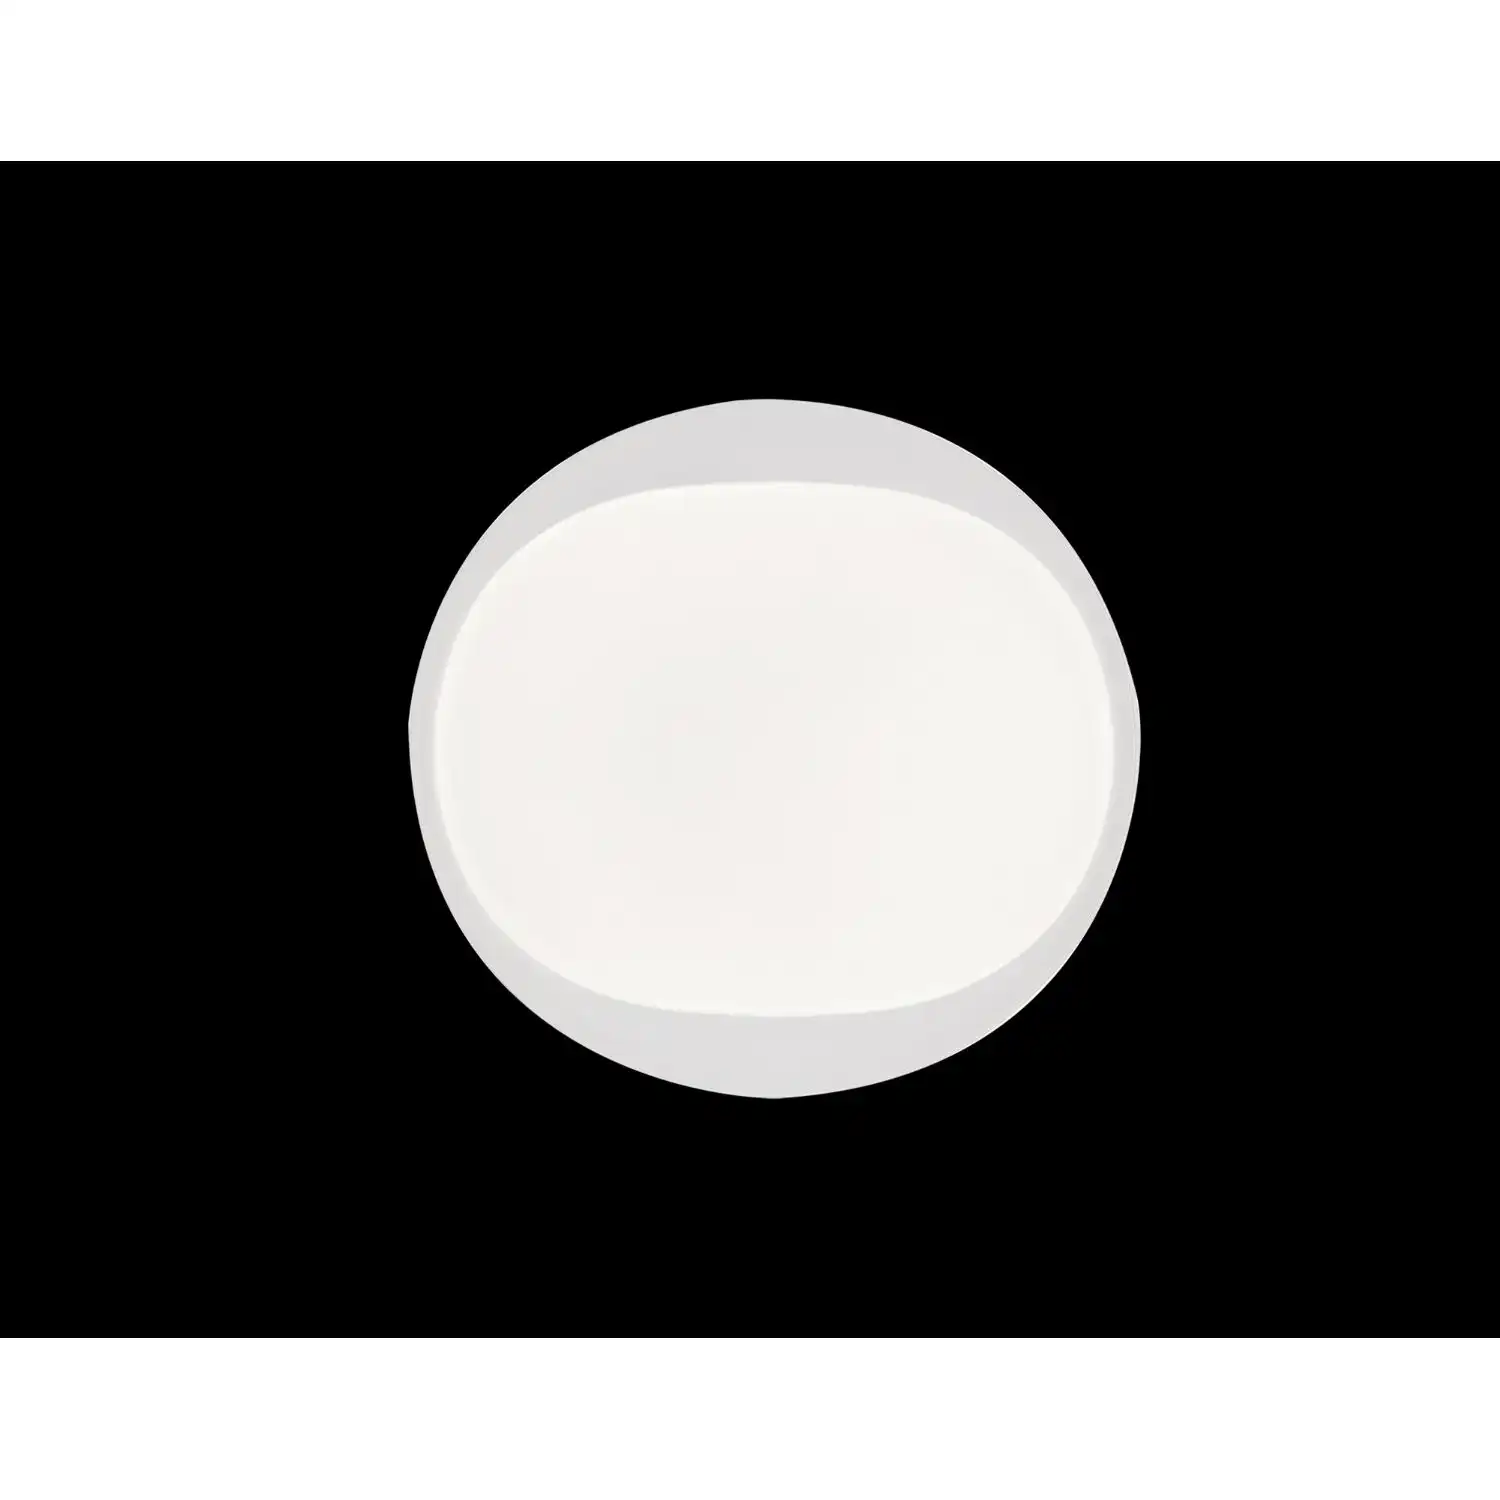 Box Dimmable Ceiling, 24W LED With Remote Control 3000K 6000K, 900lm, White, 3yrs Warranty